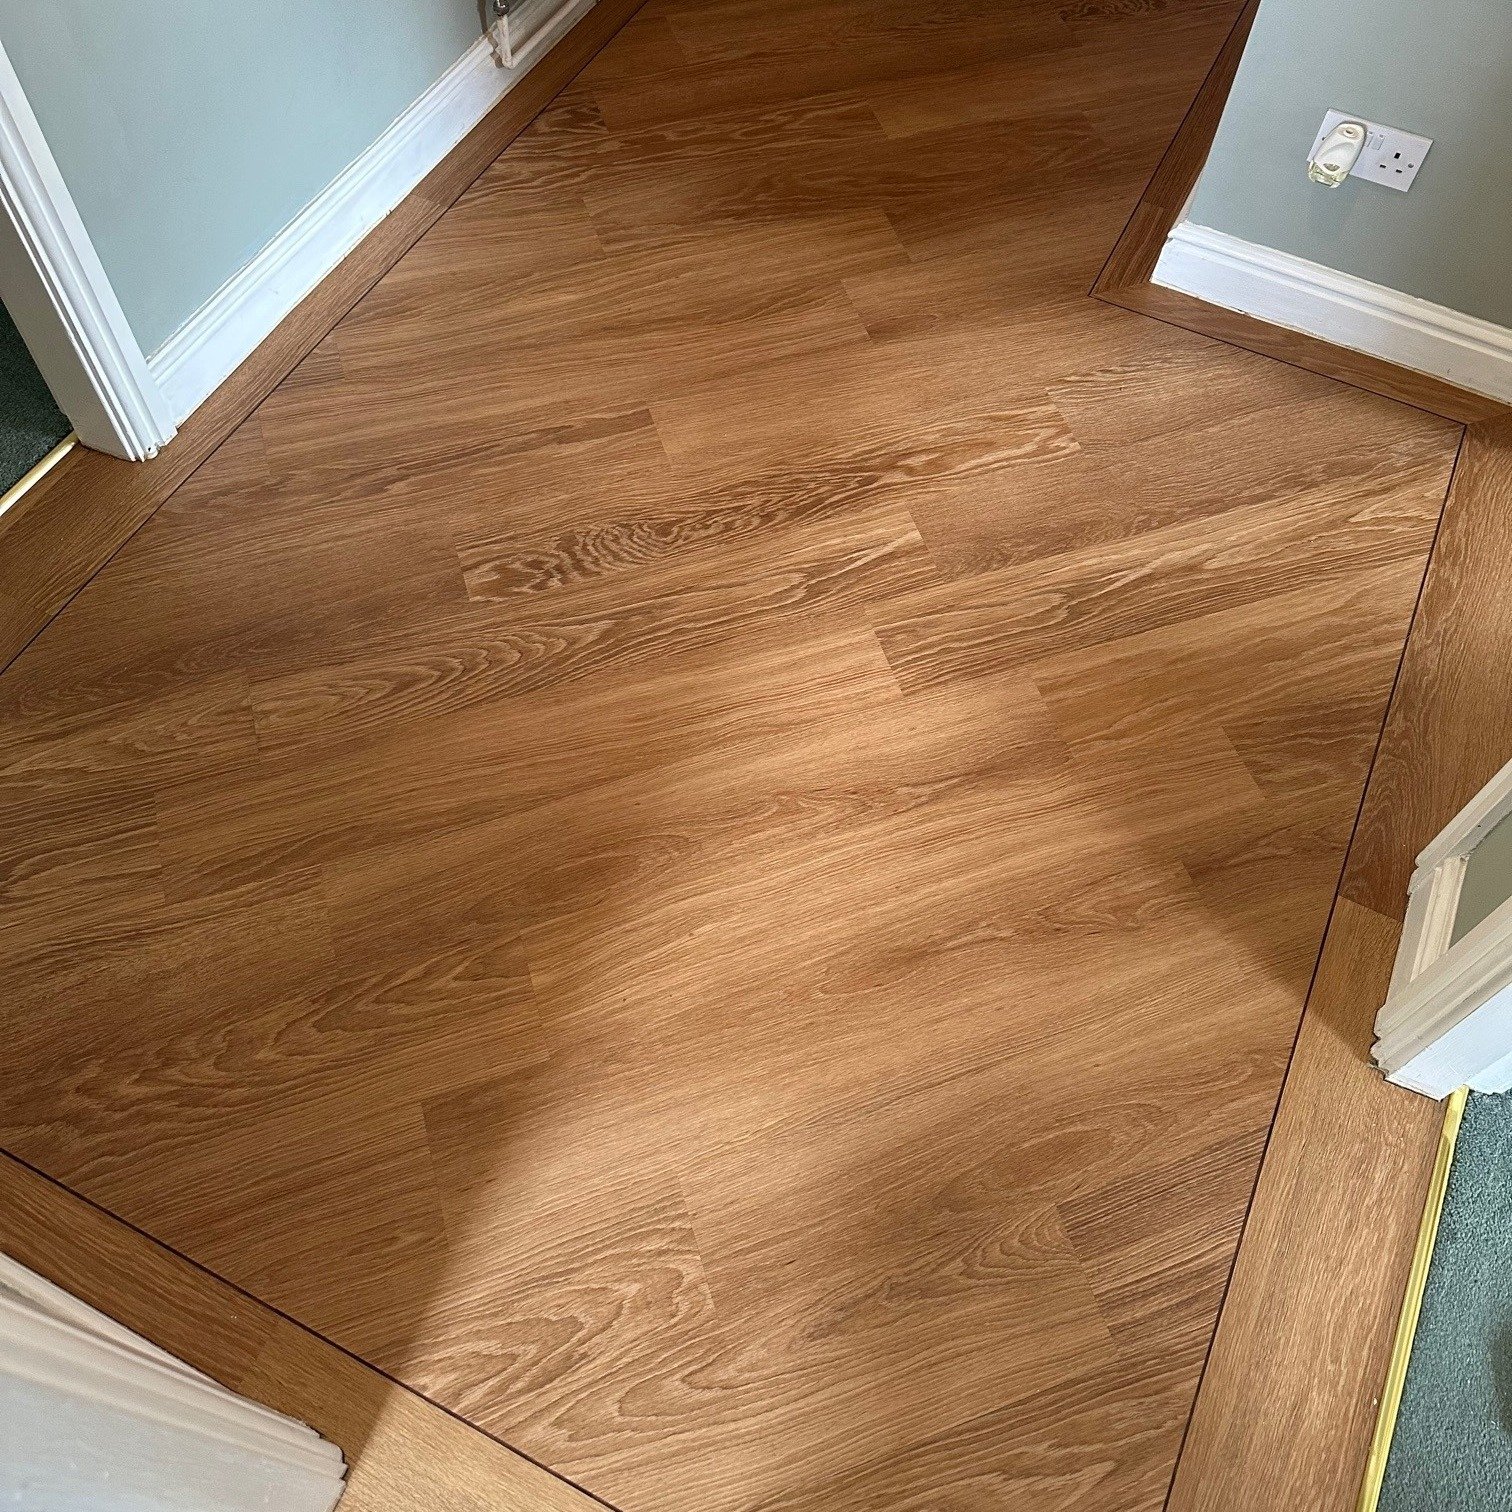 📸 @karndean_uk Knight Tile - Honey Limed Oak KP155

Fitted by us on a 45 degree angle with a perimeter border, using the Russet design strip!
.
.
.
 #YourSpaceYourStyle #flooring #sbffloors #feedback #designflooring #familybusiness #simplybeautifulf